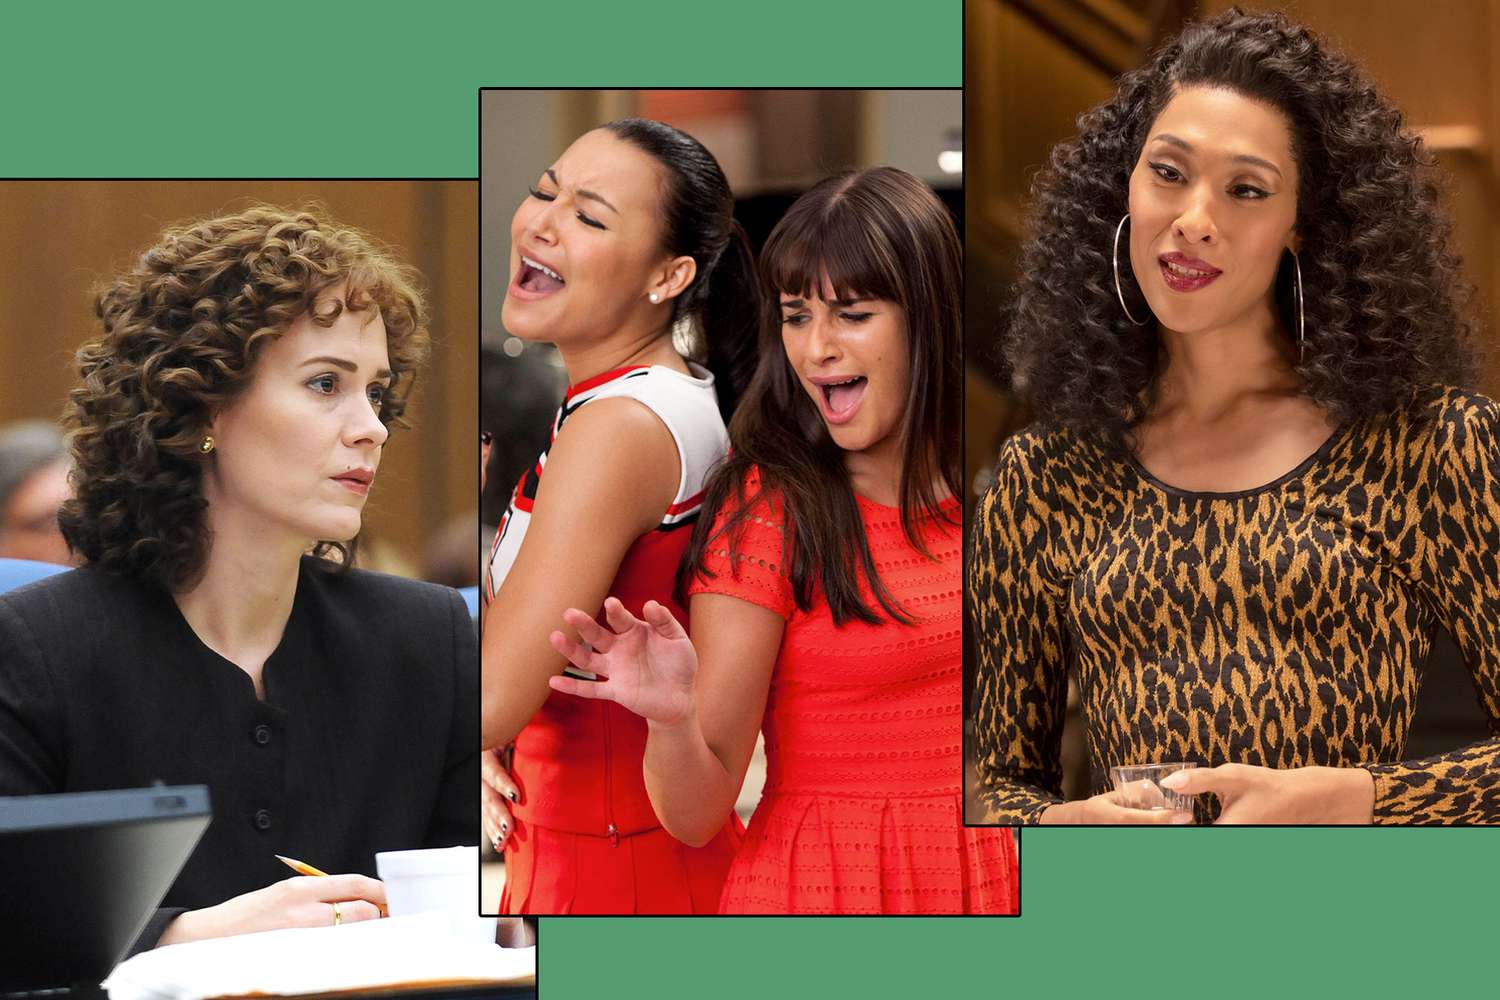 The 10 best Ryan Murphy shows, ranked